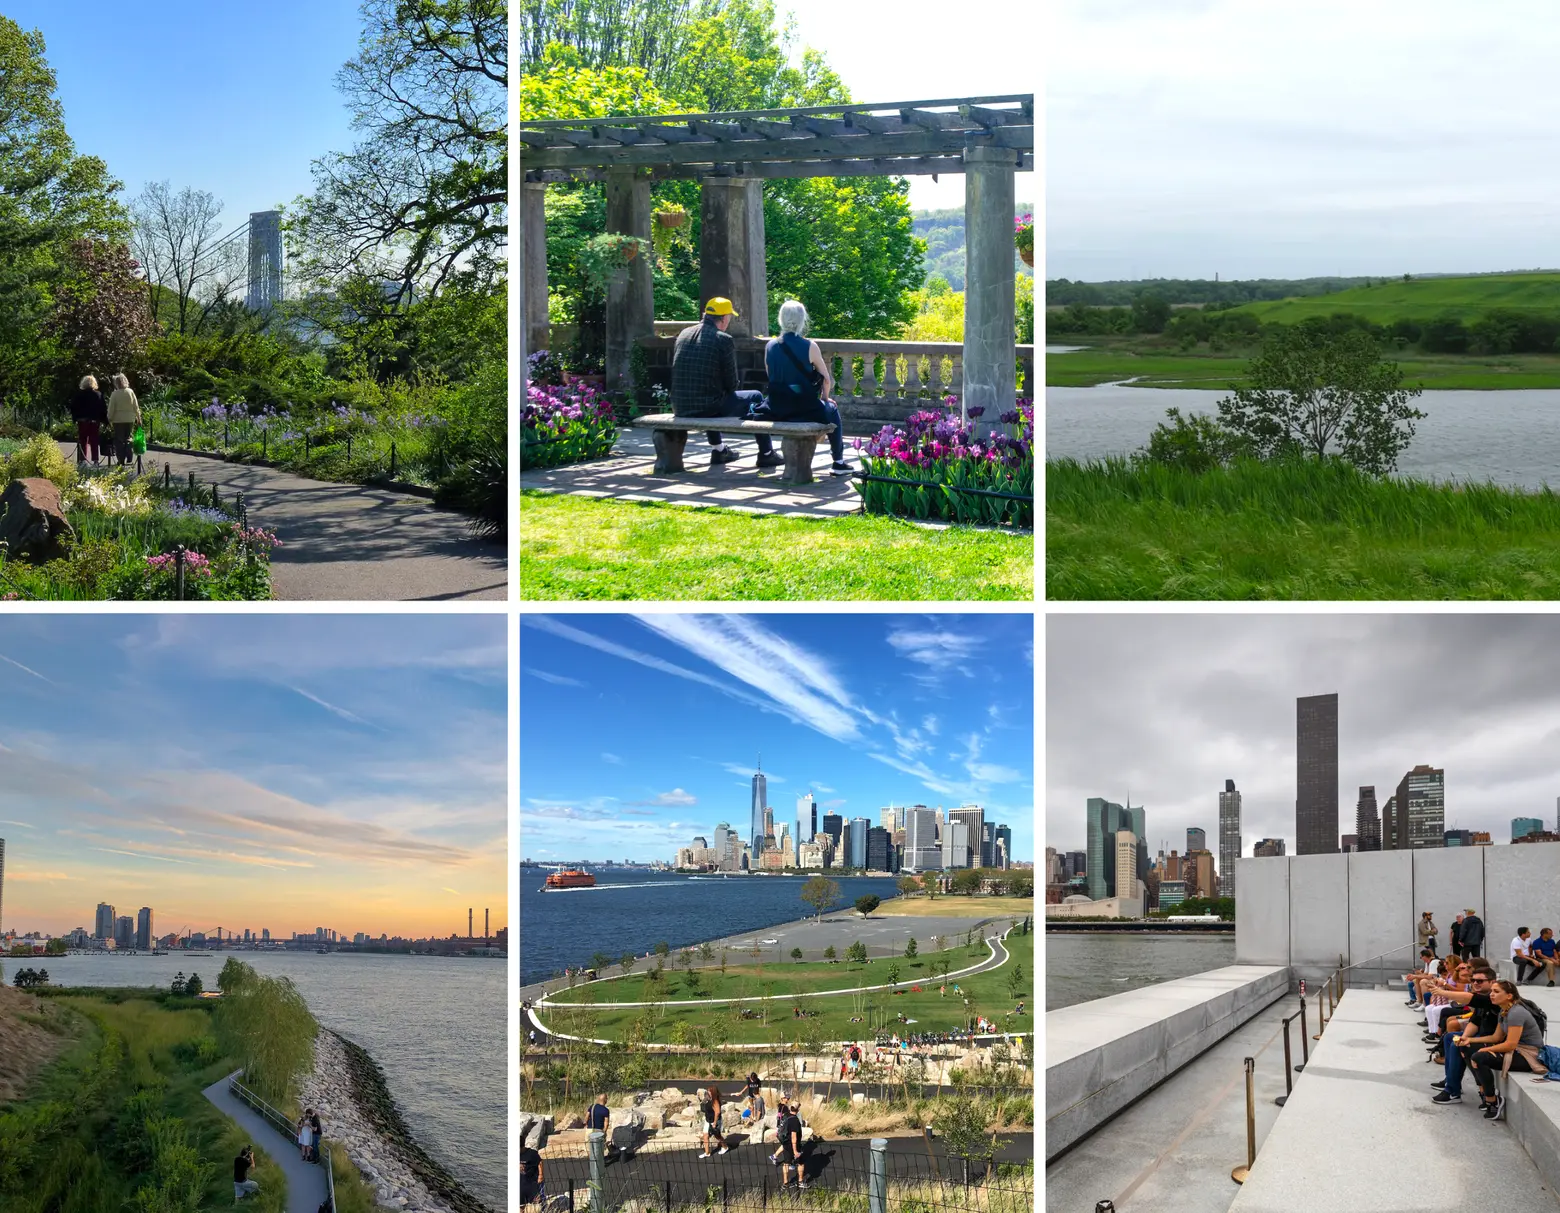 10 underrated NYC parks to visit this spring